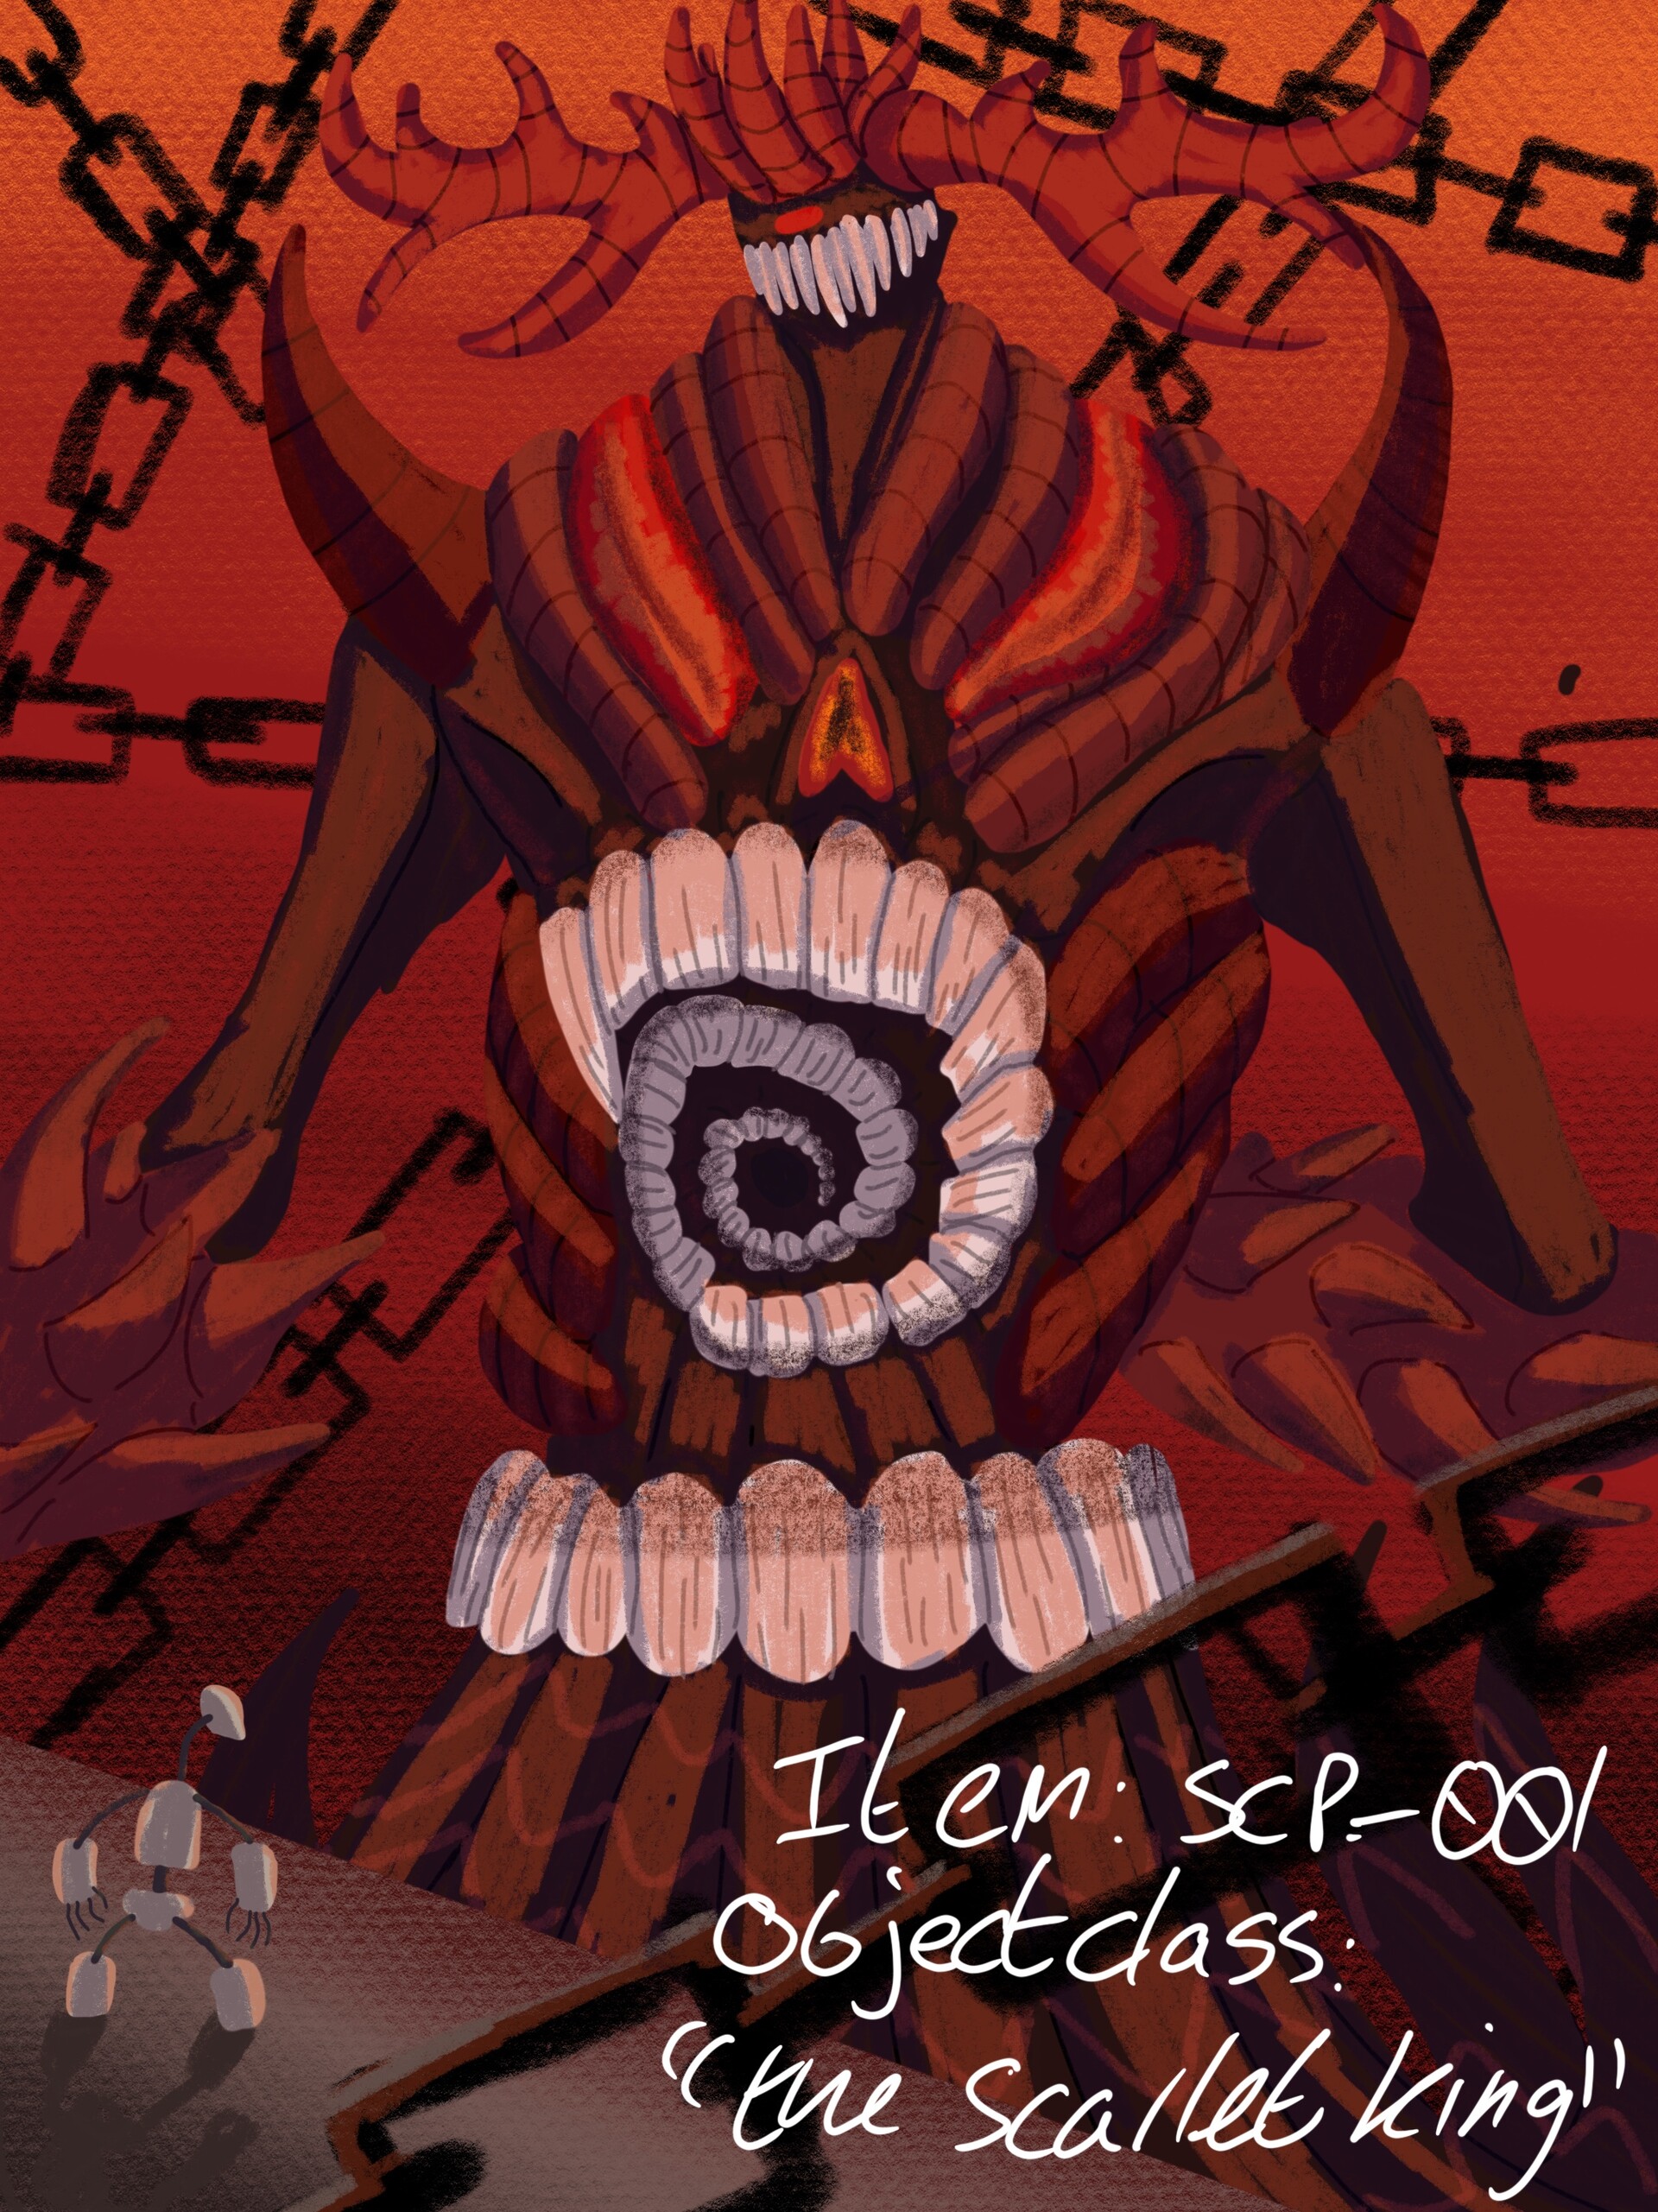 Pin on scp-061